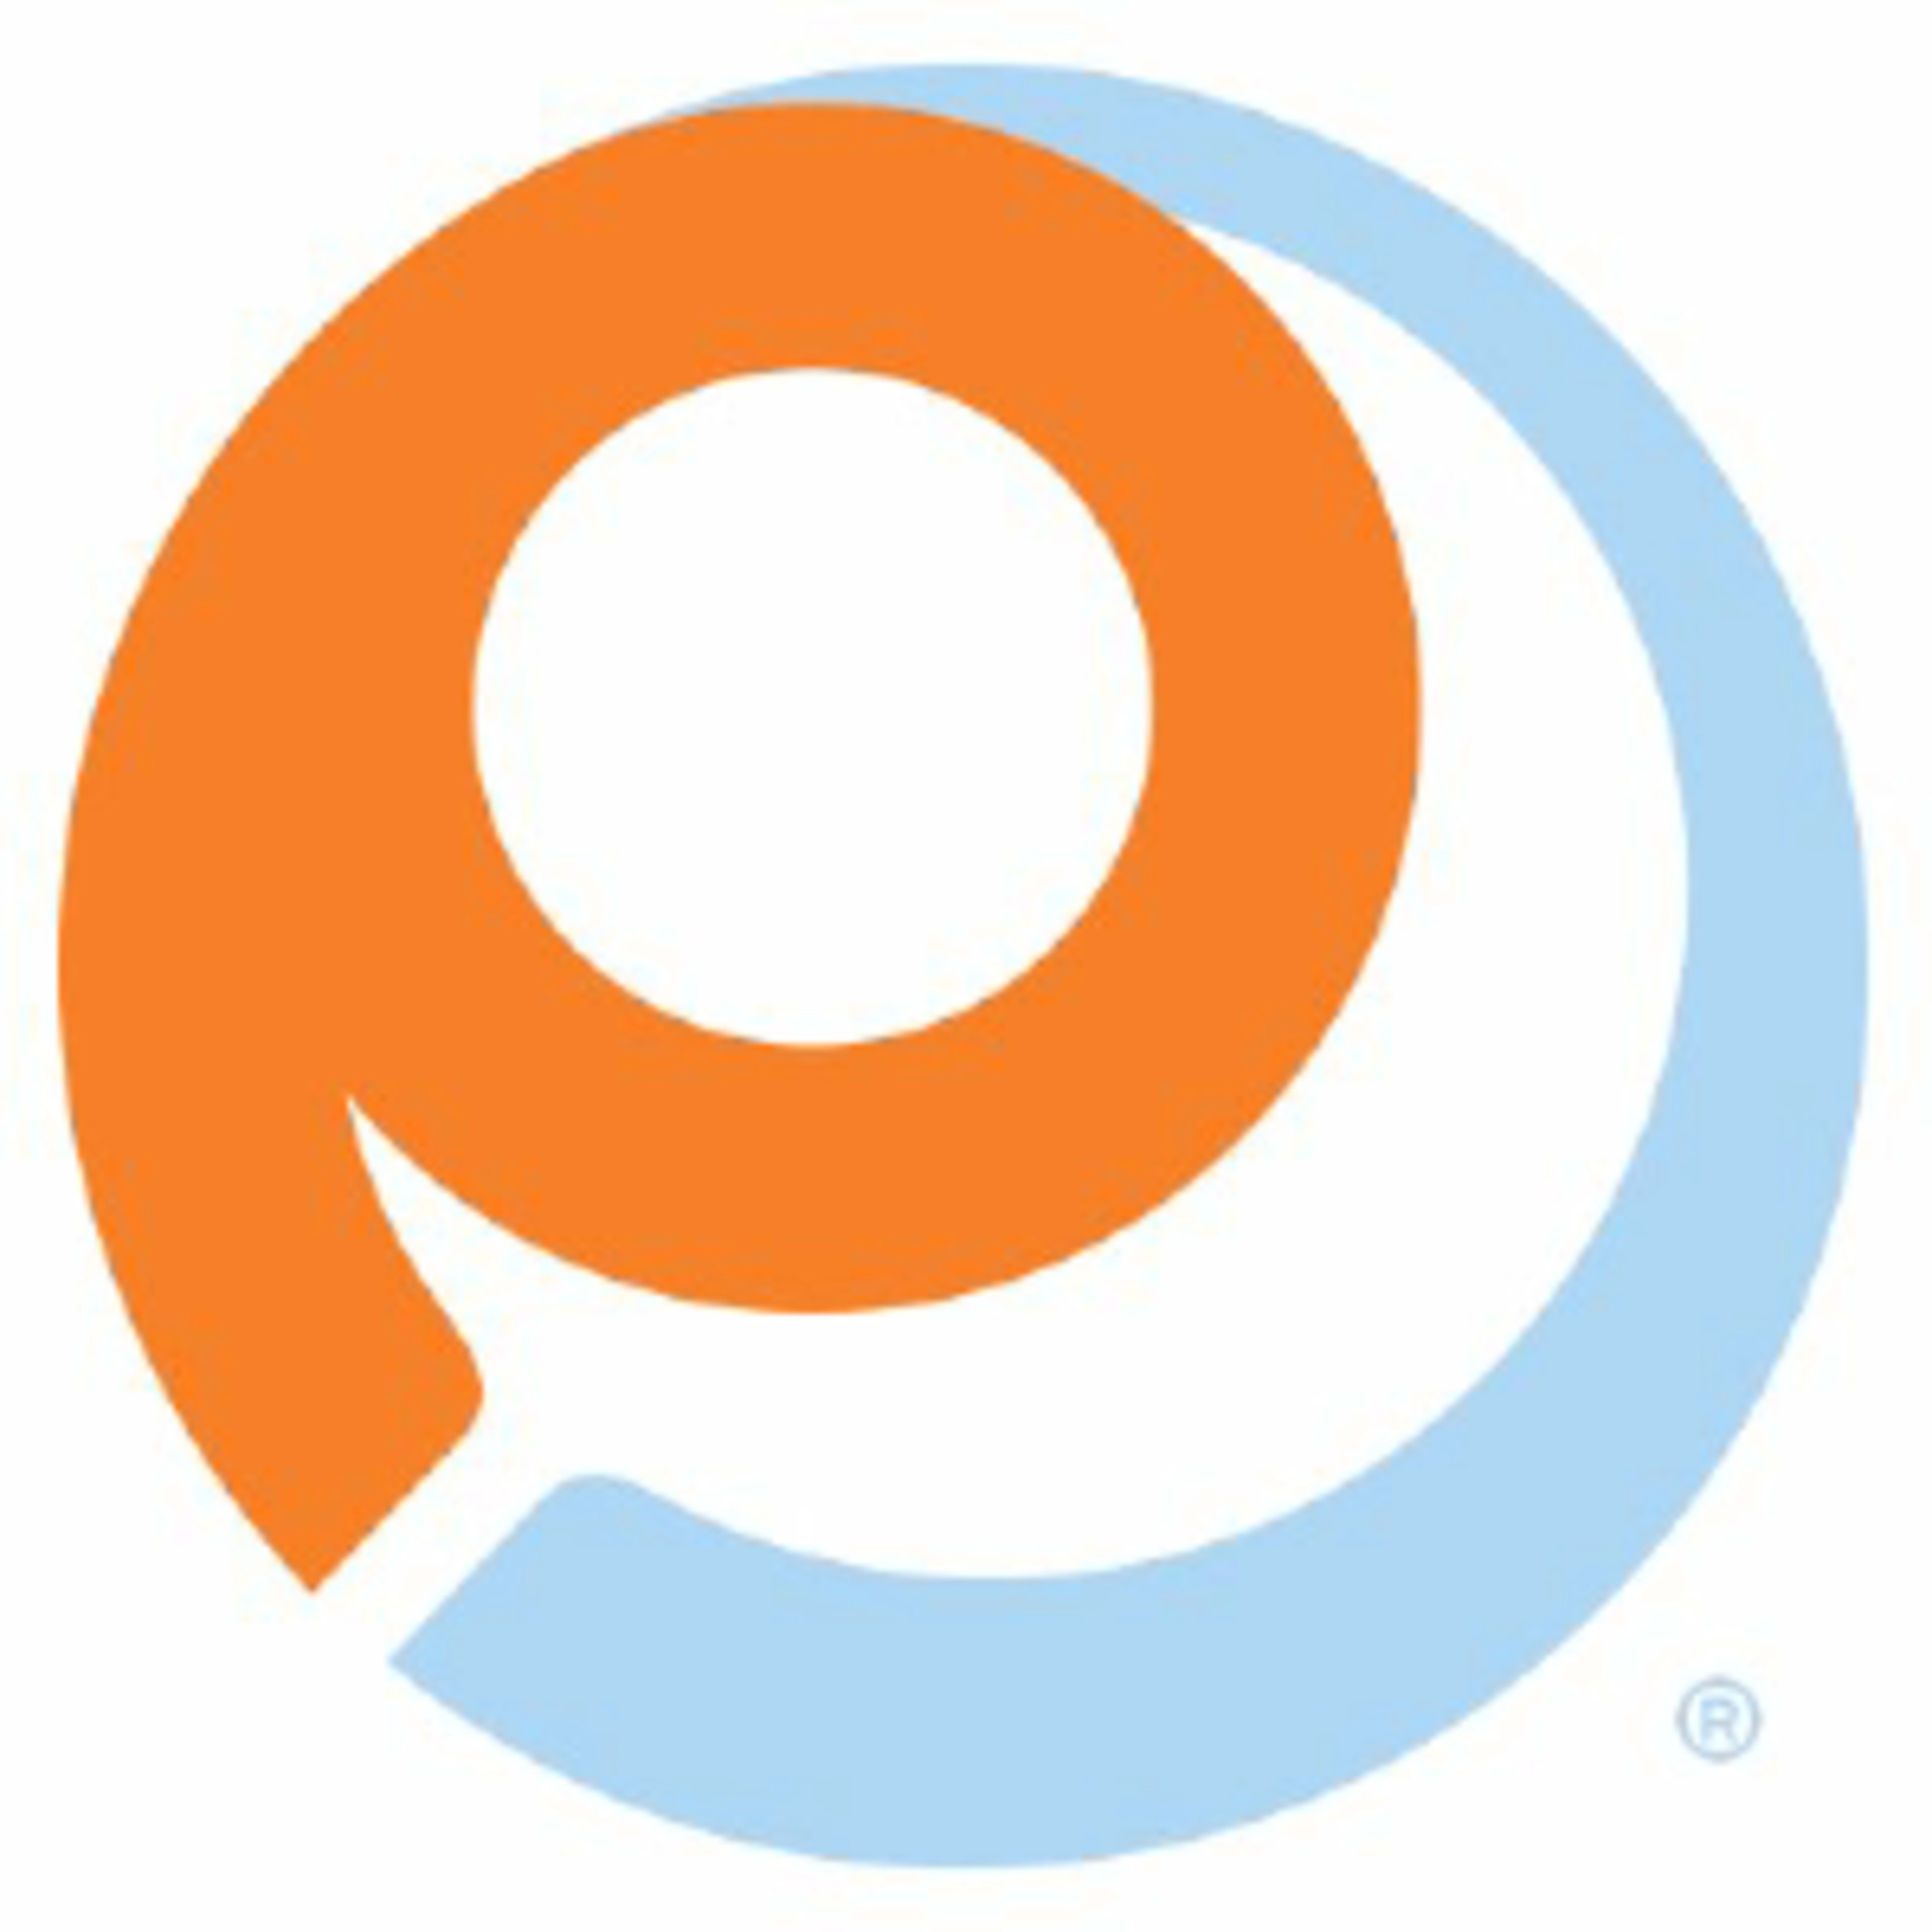 Payless ShoeSource Code